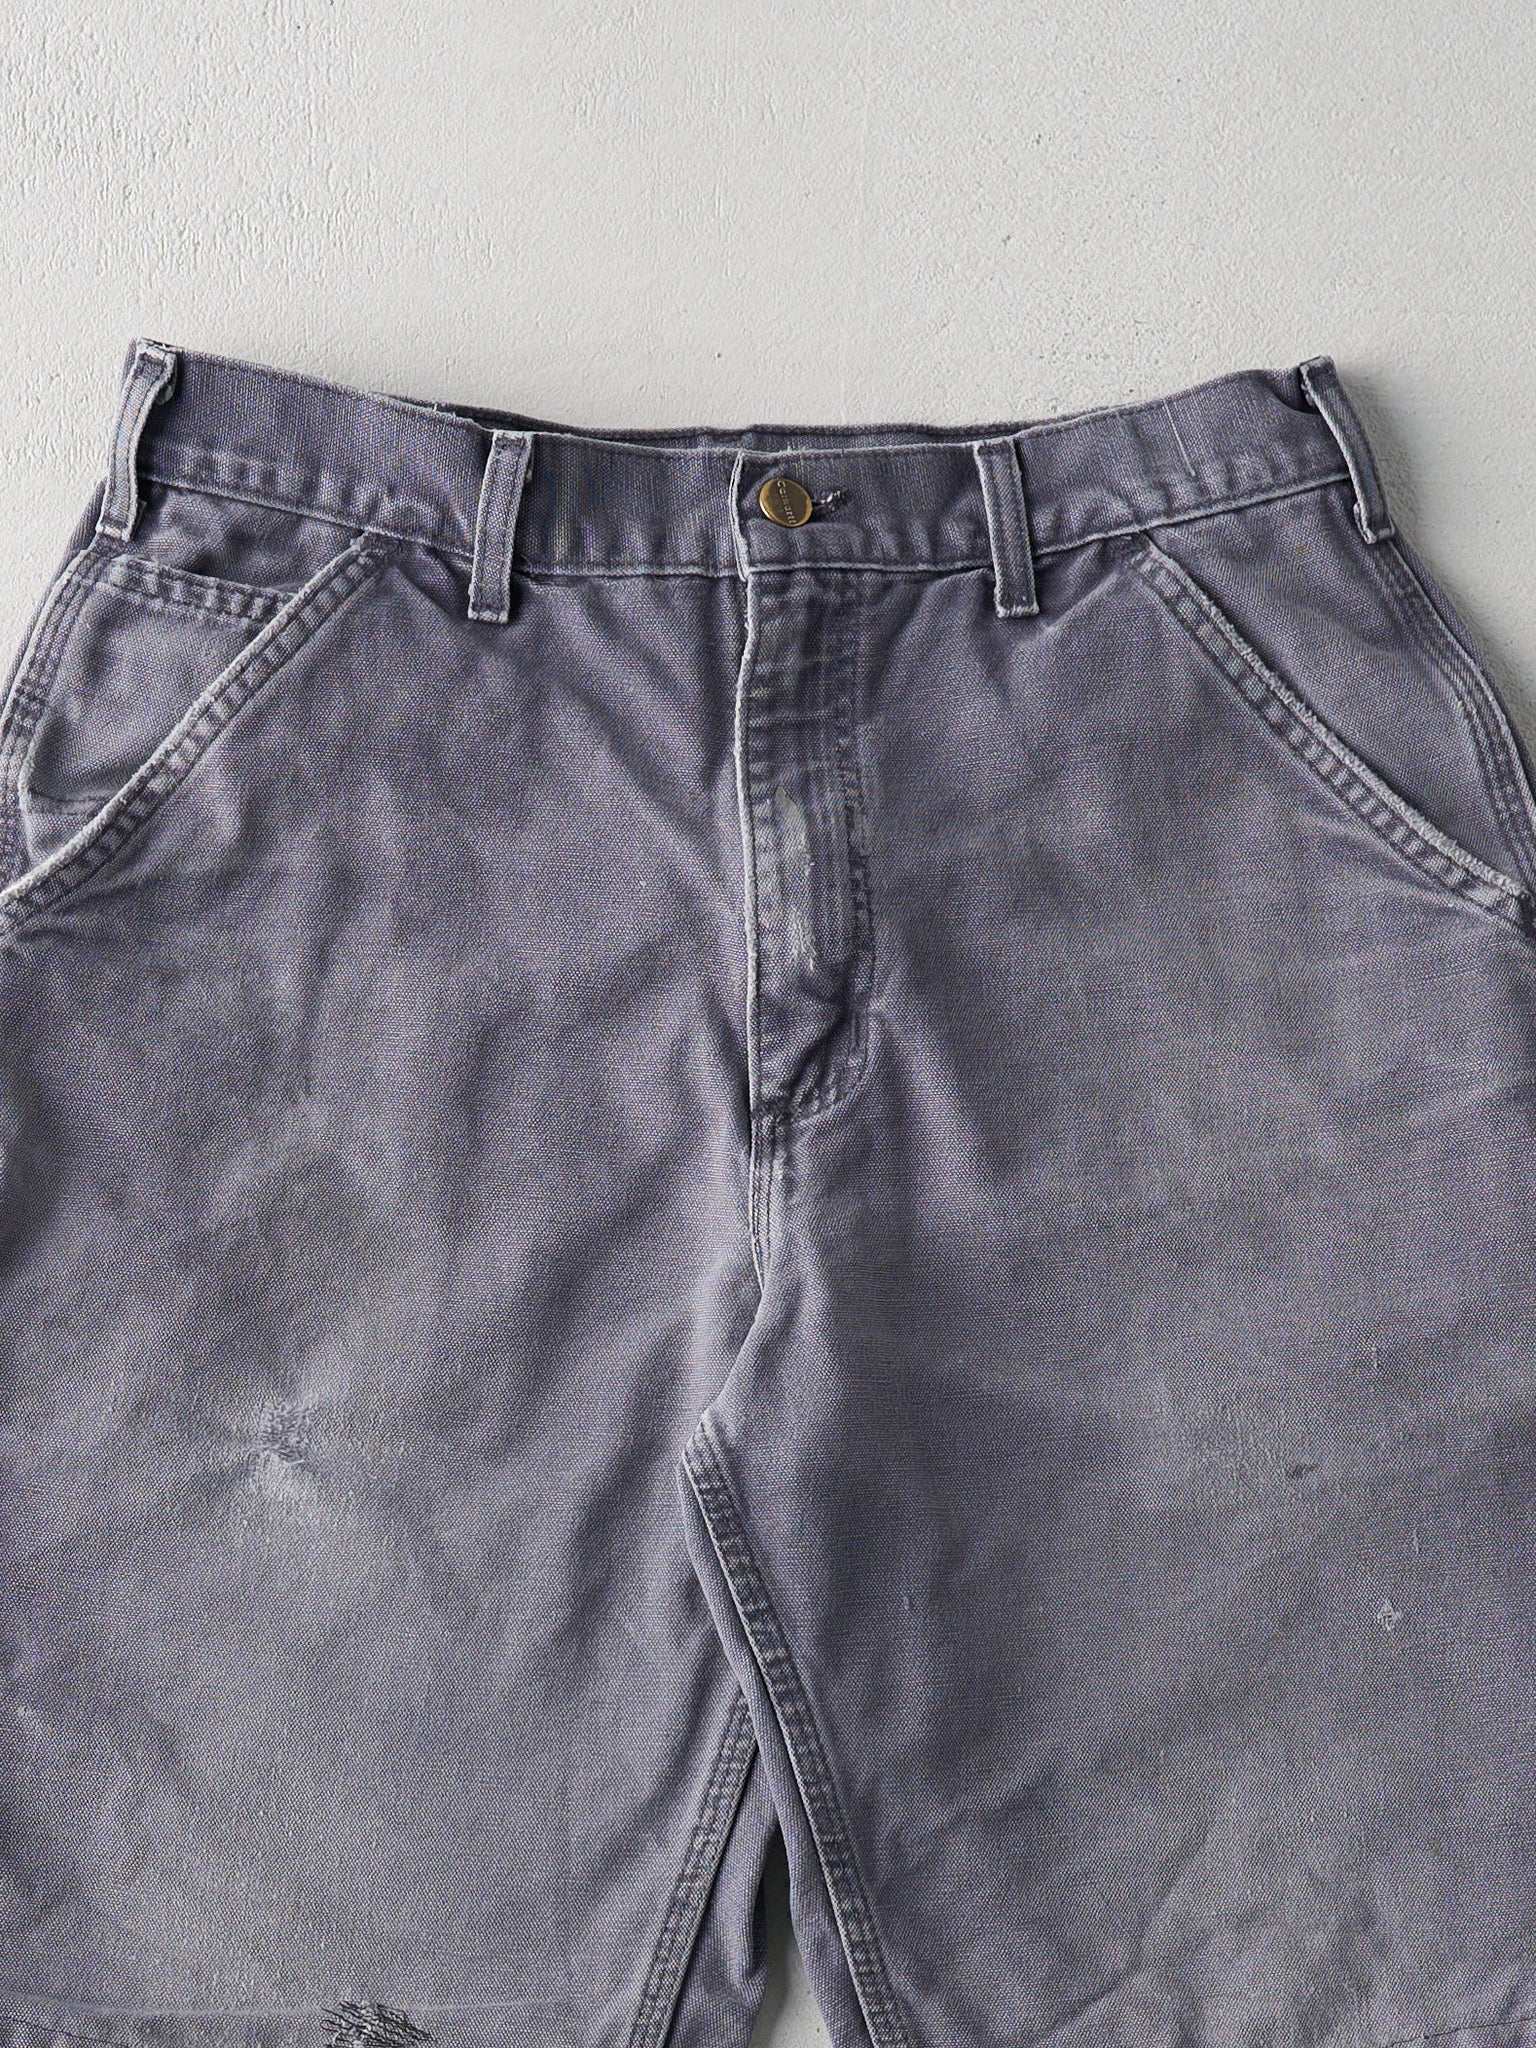 Vintage Y2K Faded Charcoal Grey Carhartt Dungaree Fit Shorts (30x10)